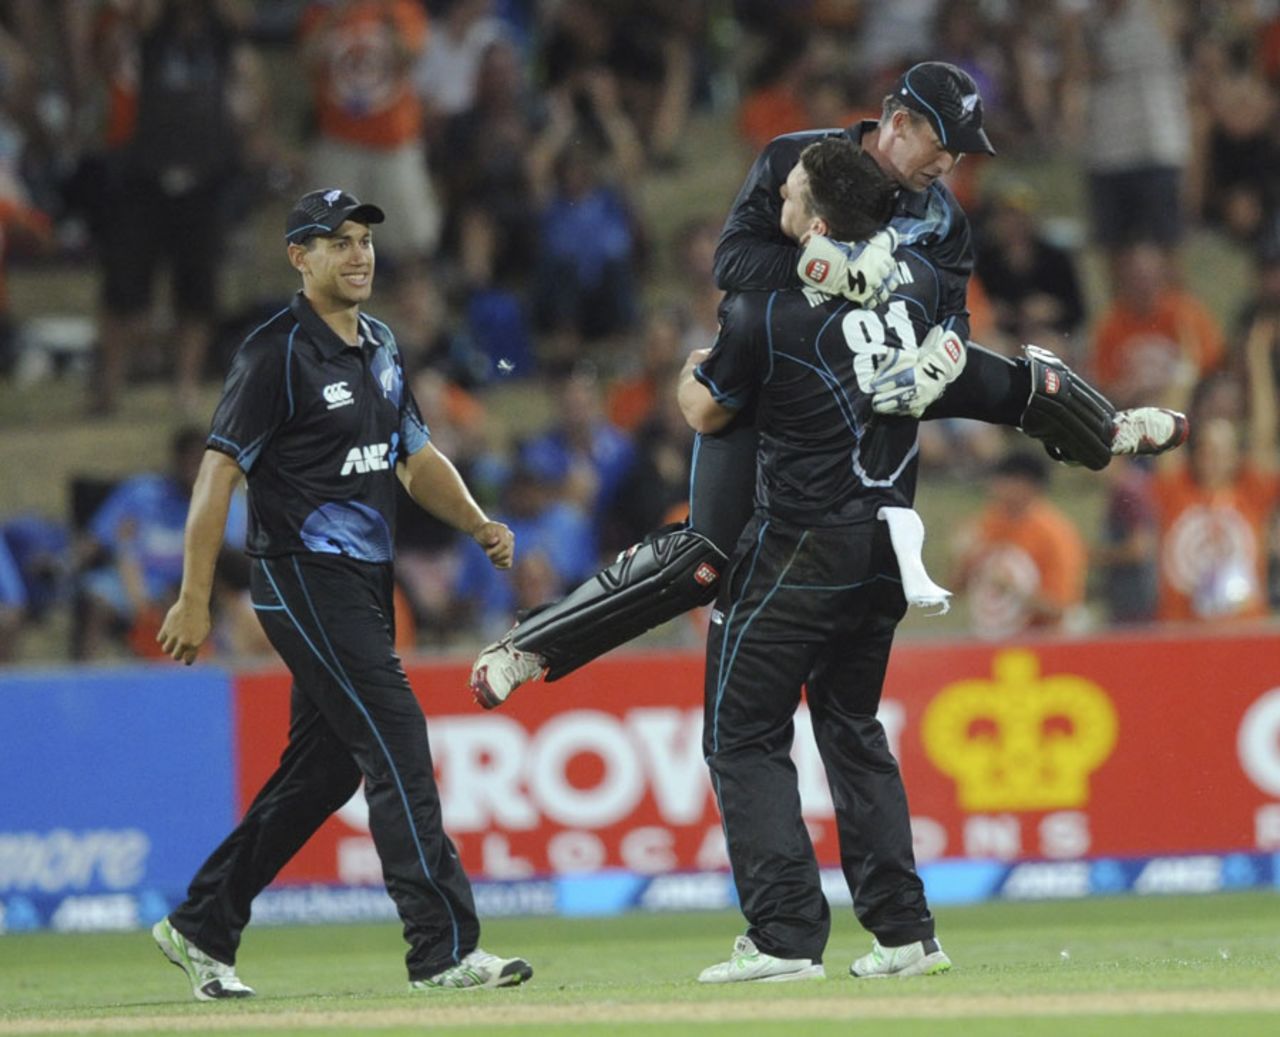 Mitchell McClenaghan is congratulated after a wicket, New Zealand v India, 1st ODI, Napier, January 19, 2014